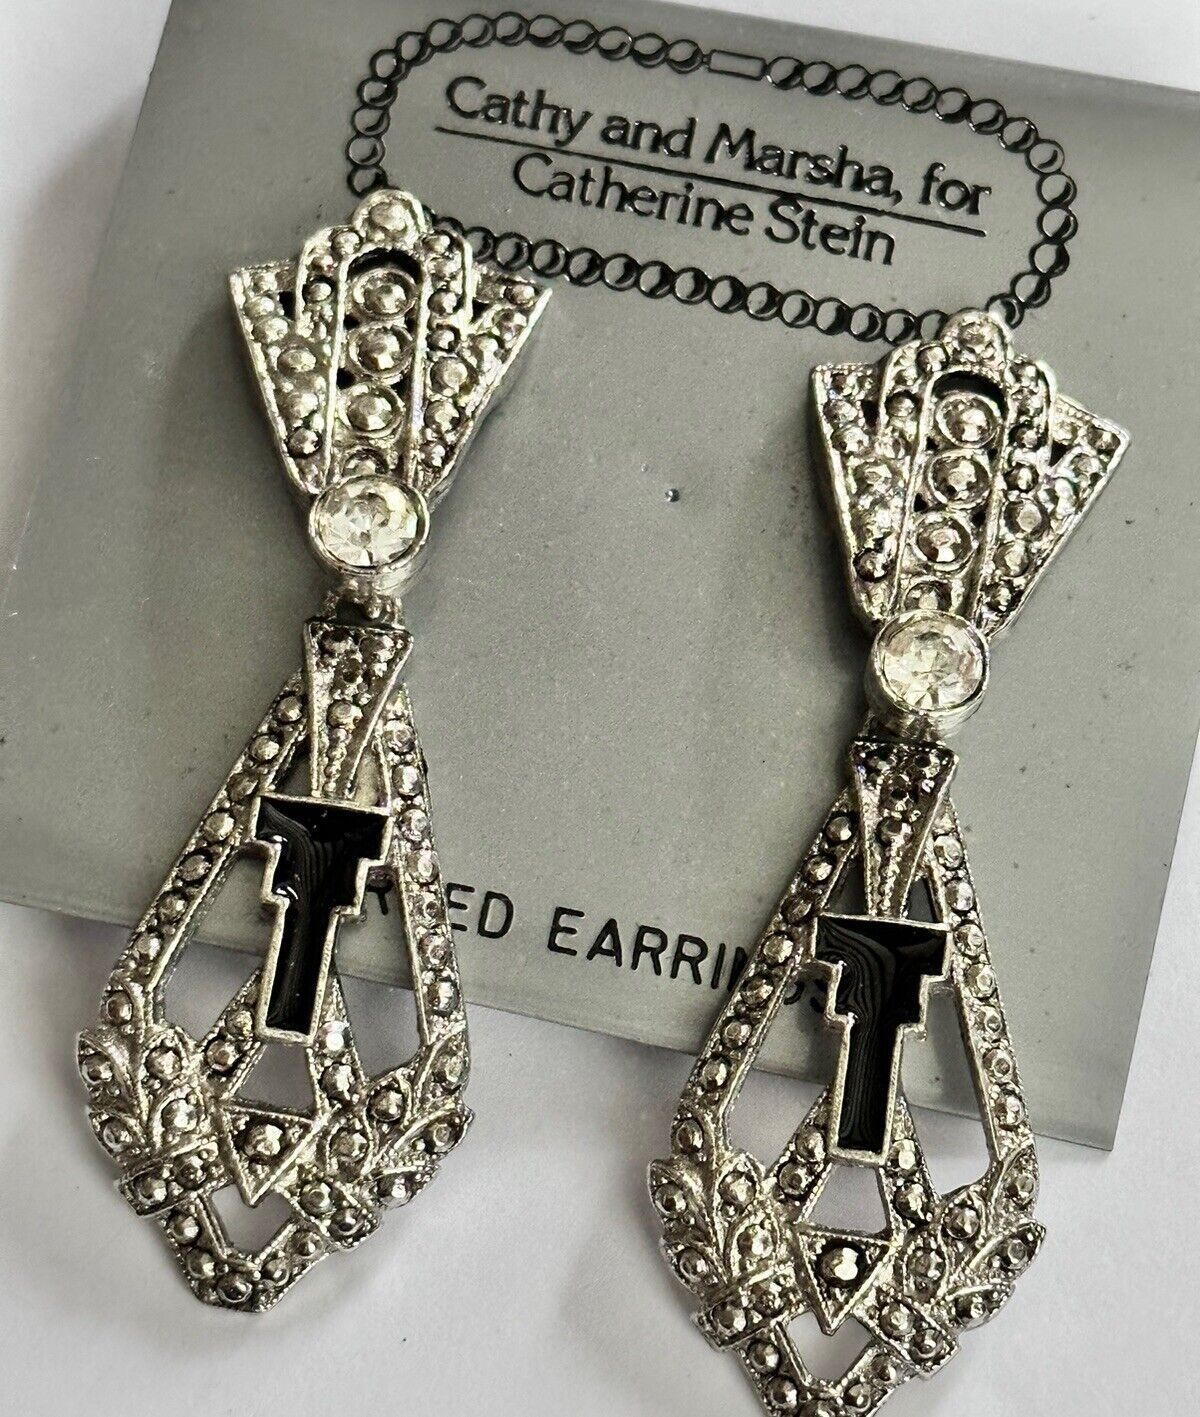 Vintage 1980s Cathy And Marsha For Catherine Stein Marcasite Style Drop Earrings